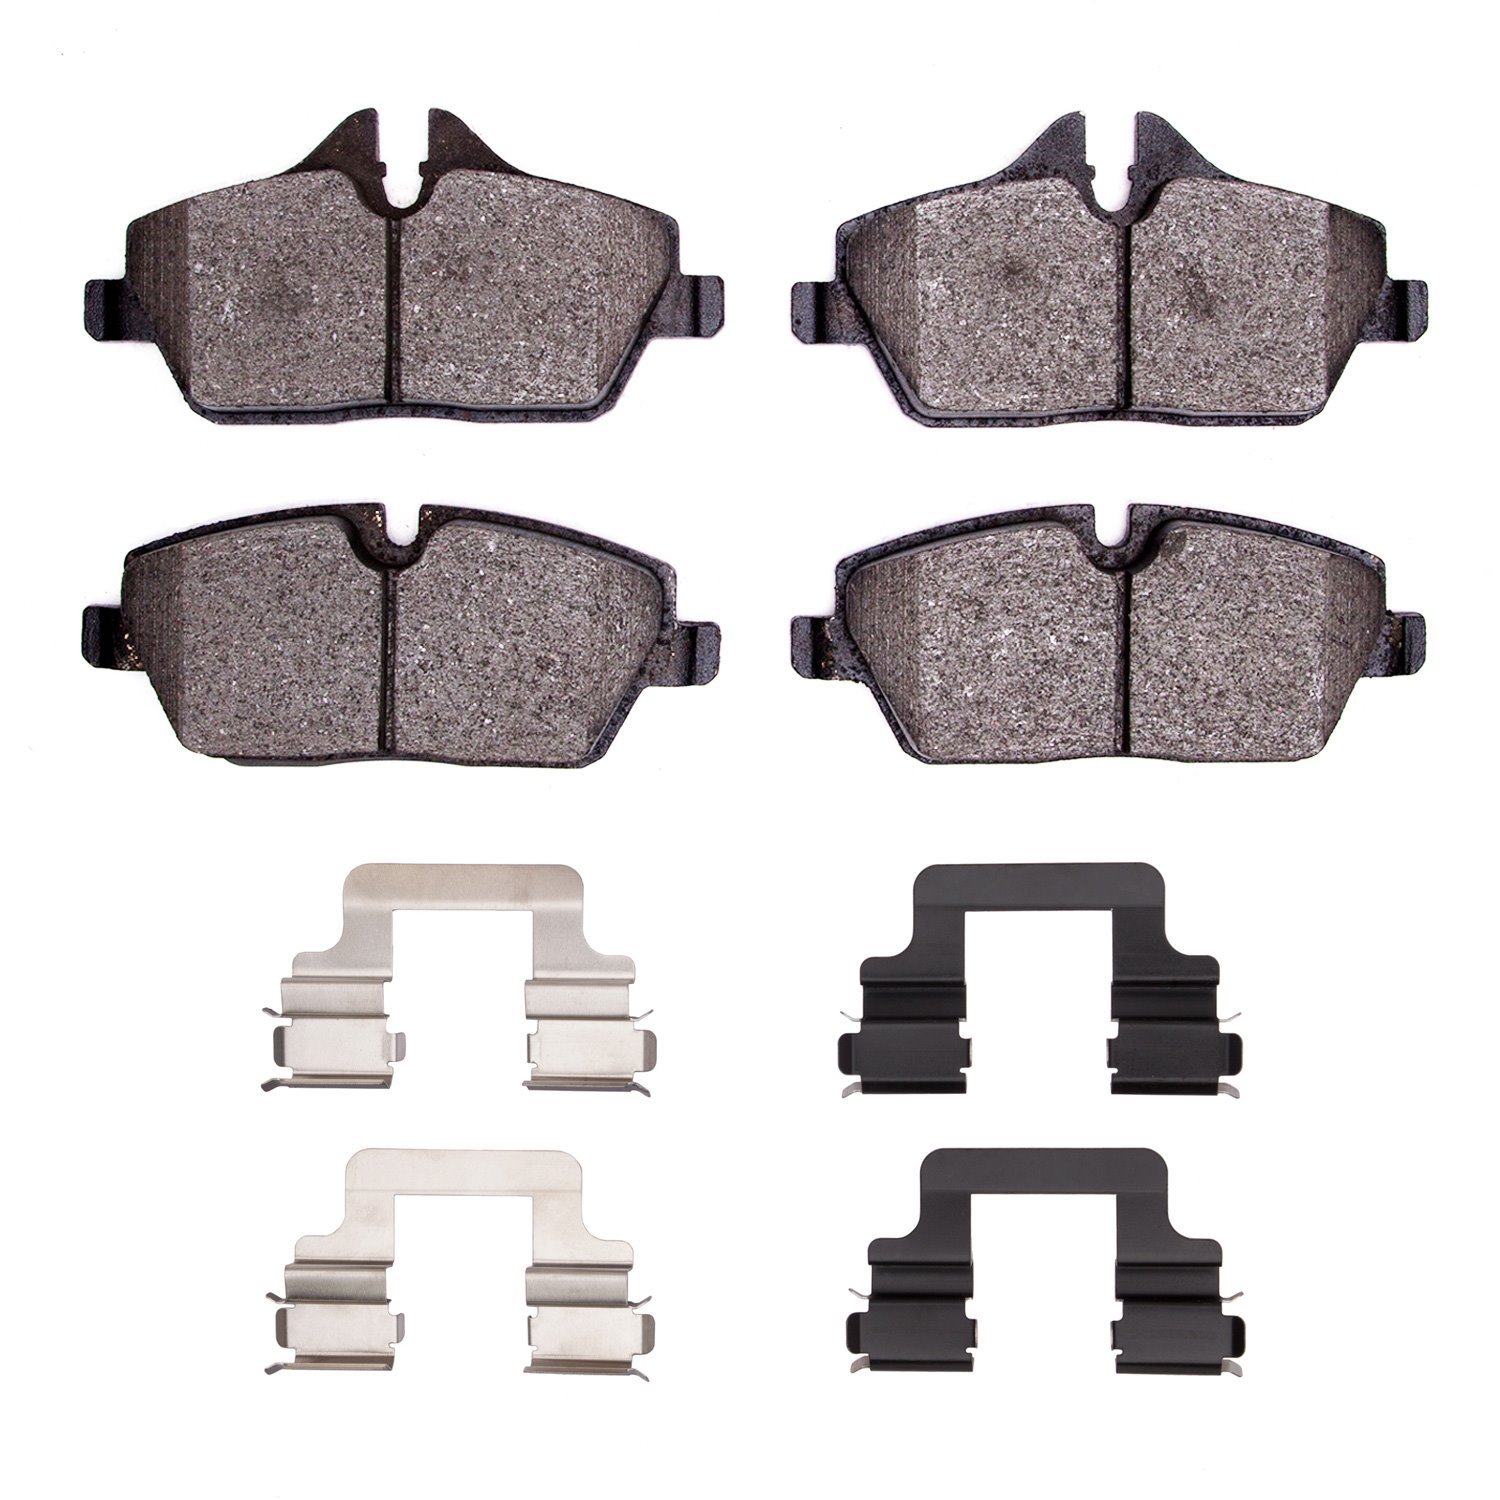 1551-1308-01 5000 Advanced Low-Metallic Brake Pads & Hardware Kit, Fits Select Multiple Makes/Models, Position: Front